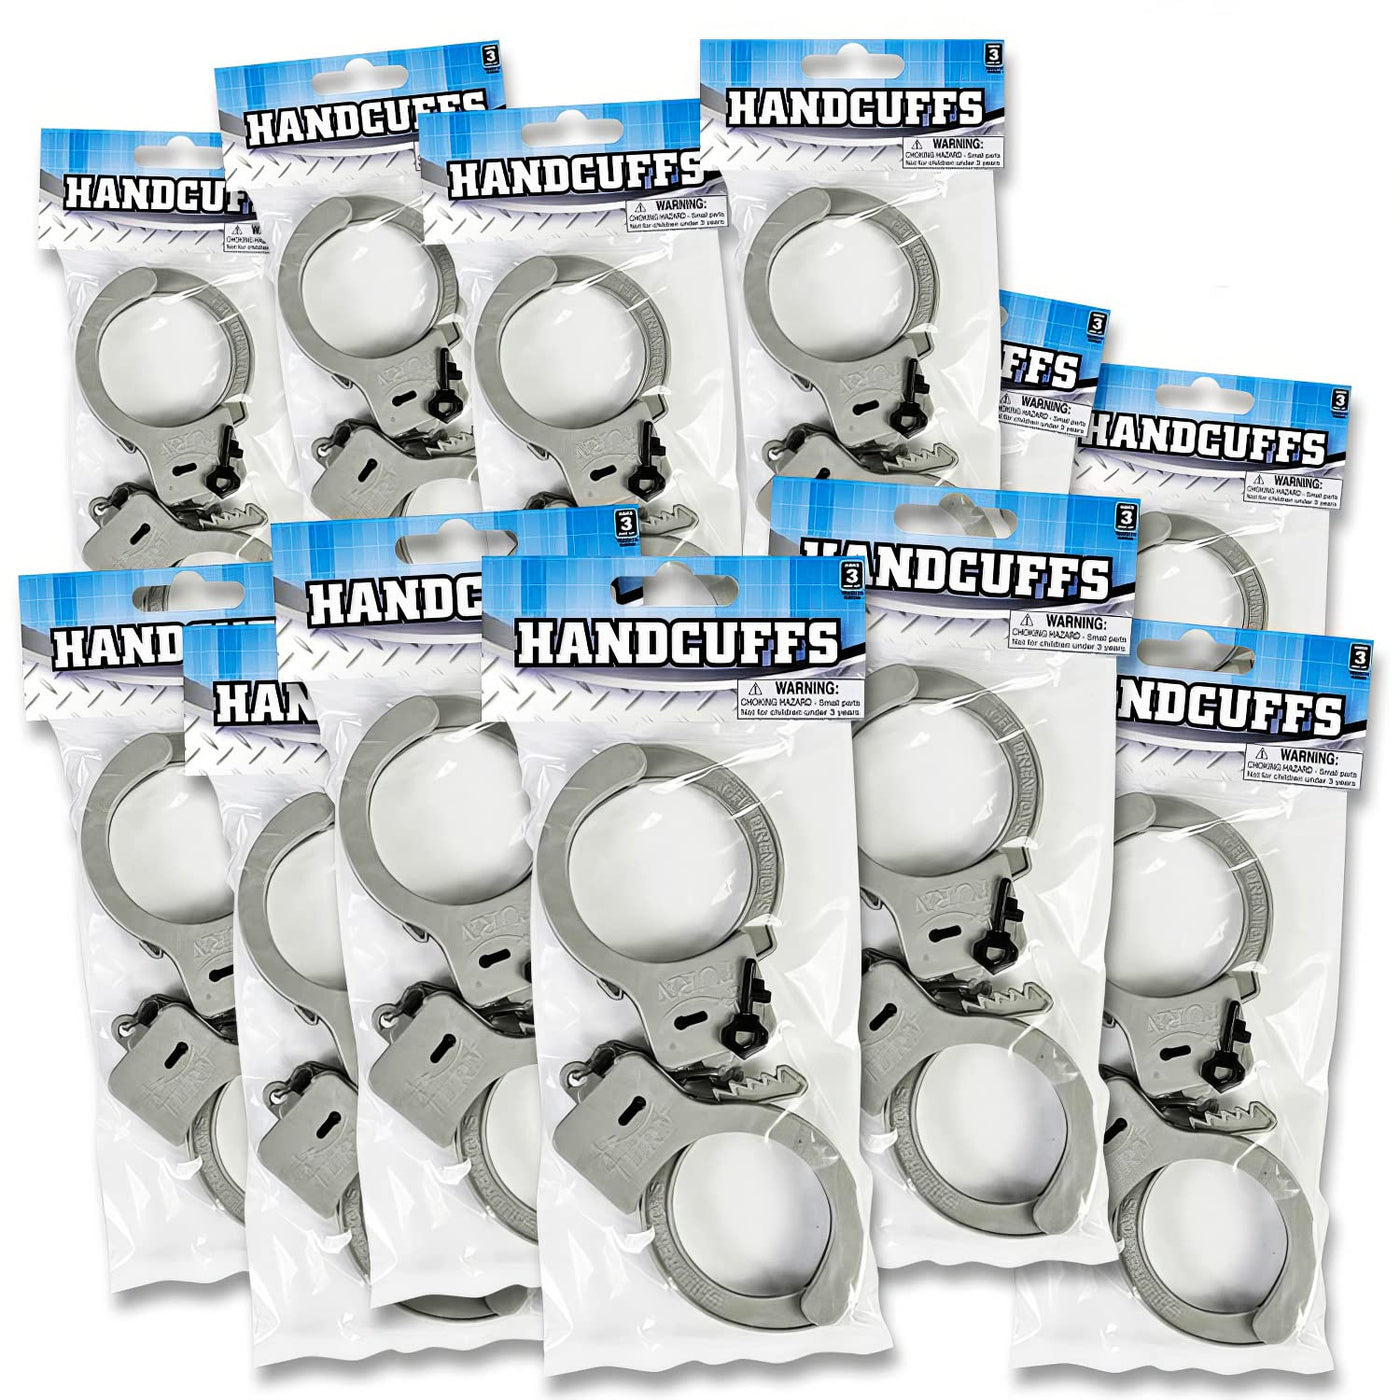 Plastic Toy Handcuffs Set - Pack of 12 - Includes One Key per Pack